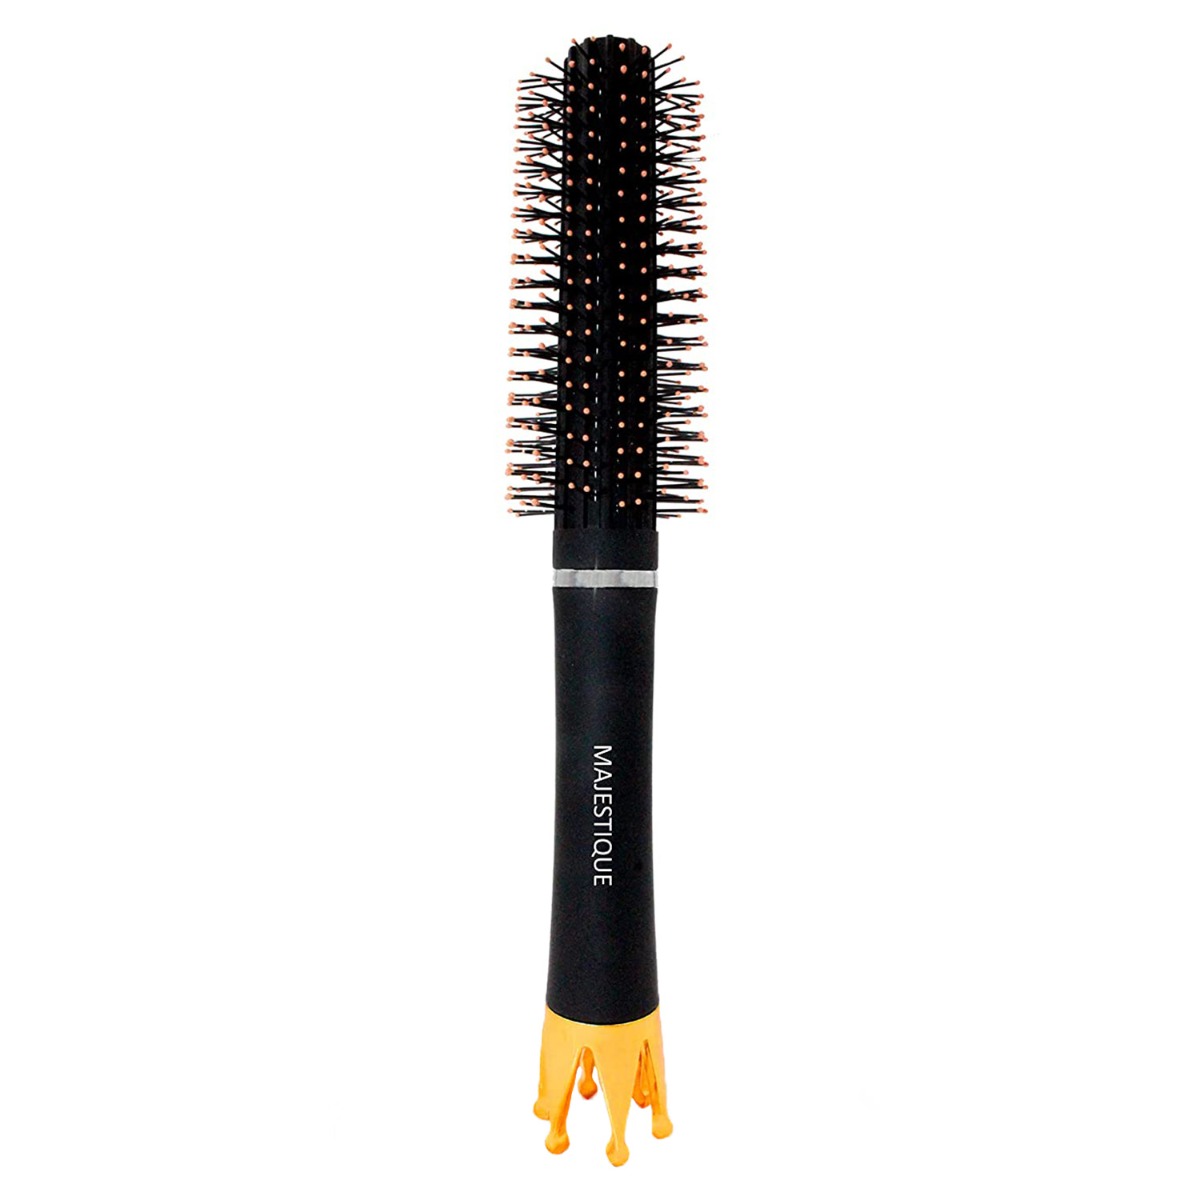 Majestique Roller Round Hair Brush For Blow Drying Is Perfect To Style - Exclusive Crown Handle, 1Pc